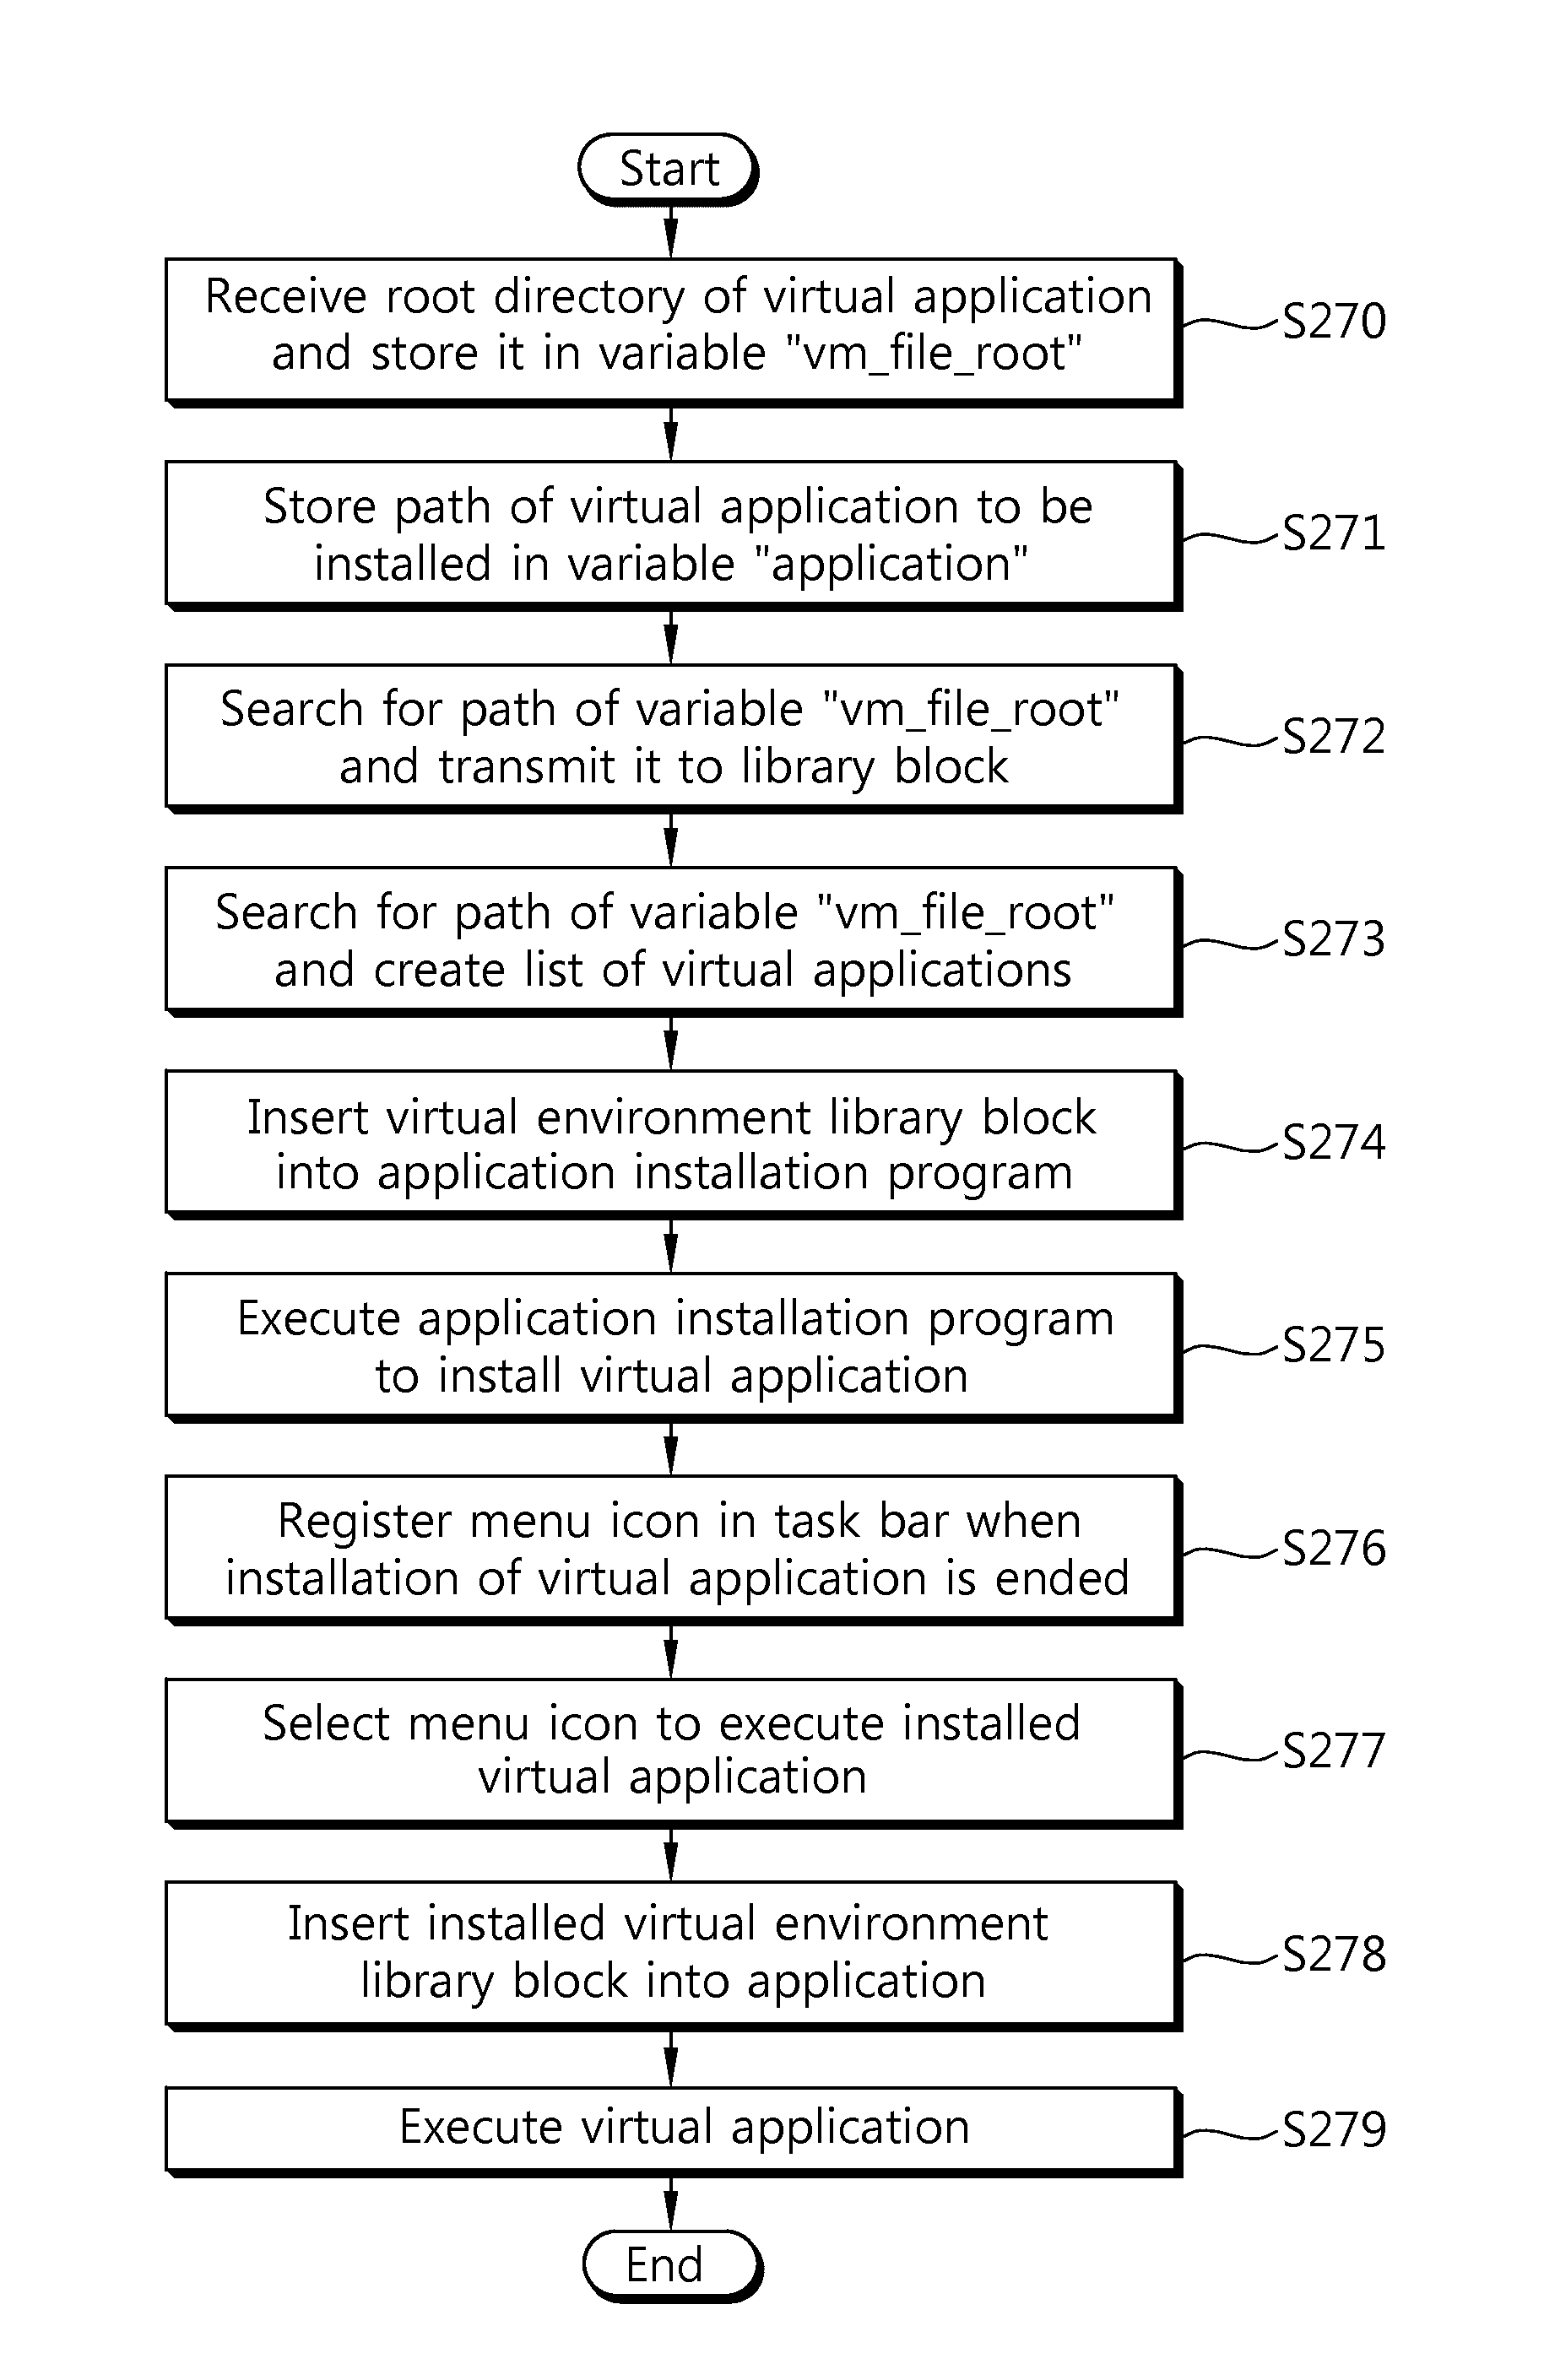 System for creating virtual application, method for installing virtual application, method for calling native API and method for executing virtual application